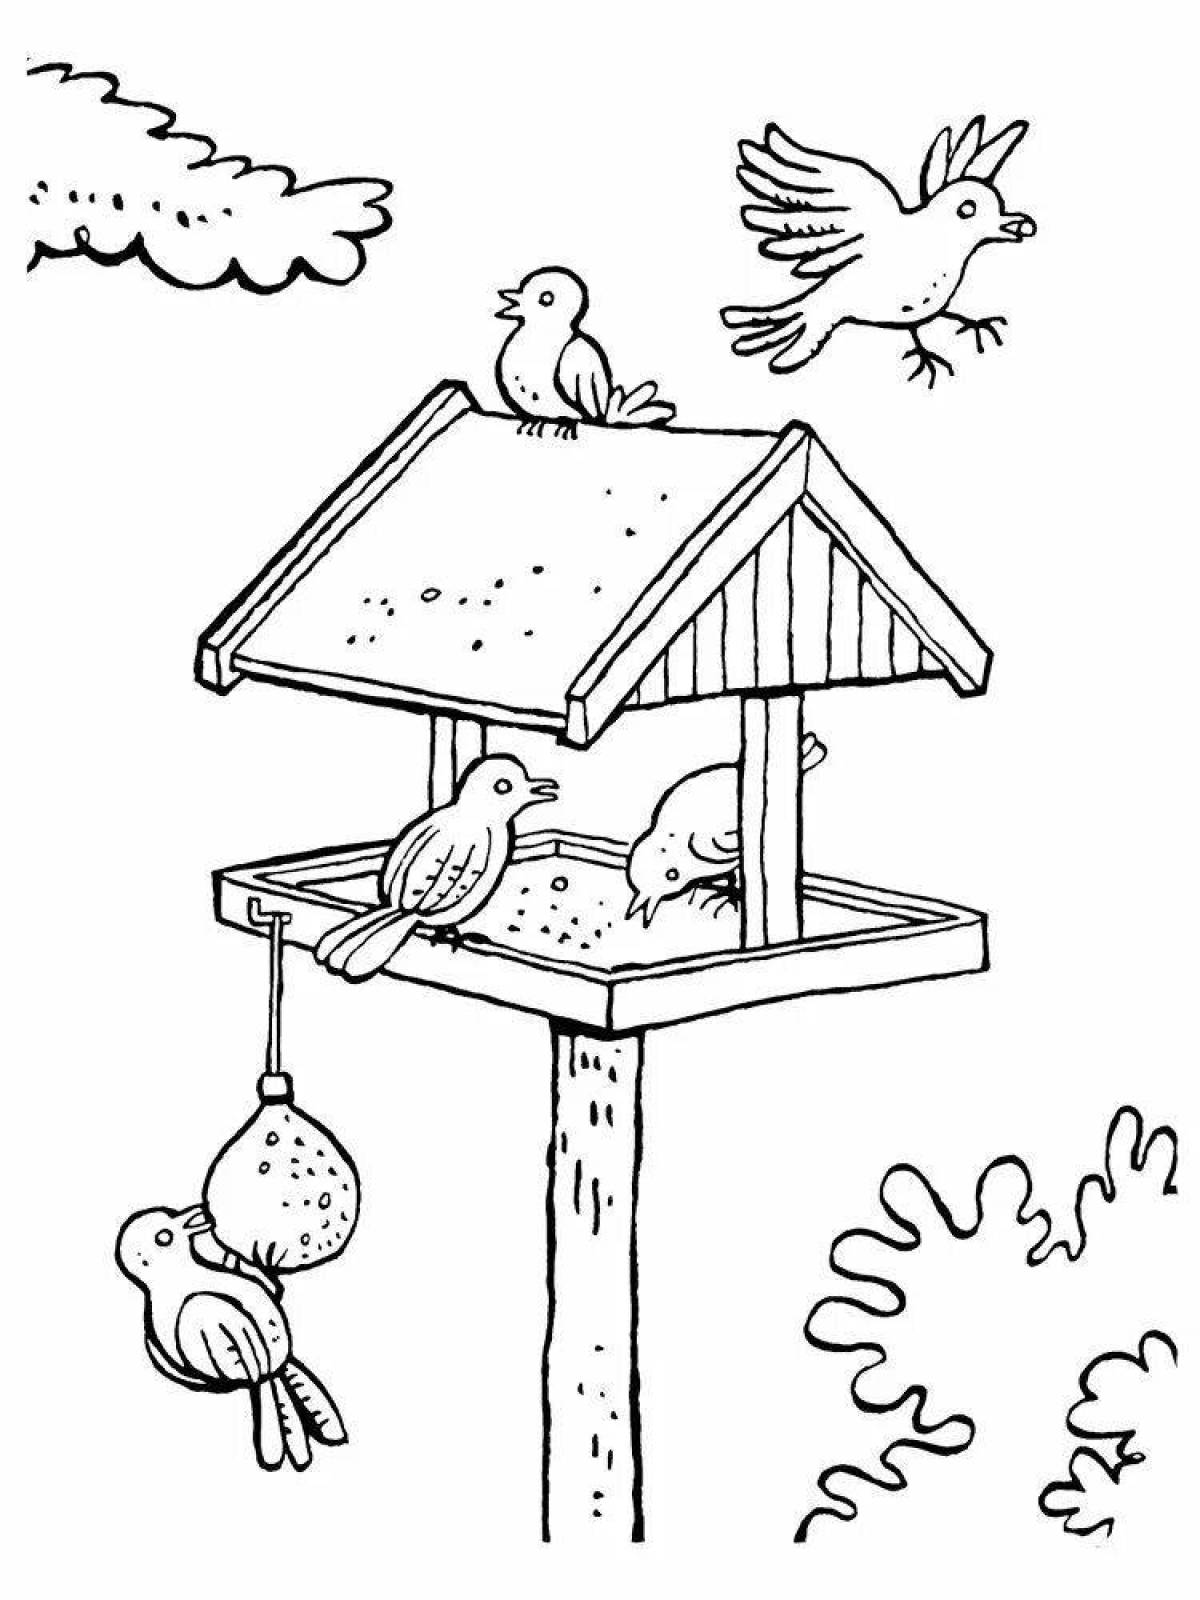 Outstanding bird feeder coloring page for little kids